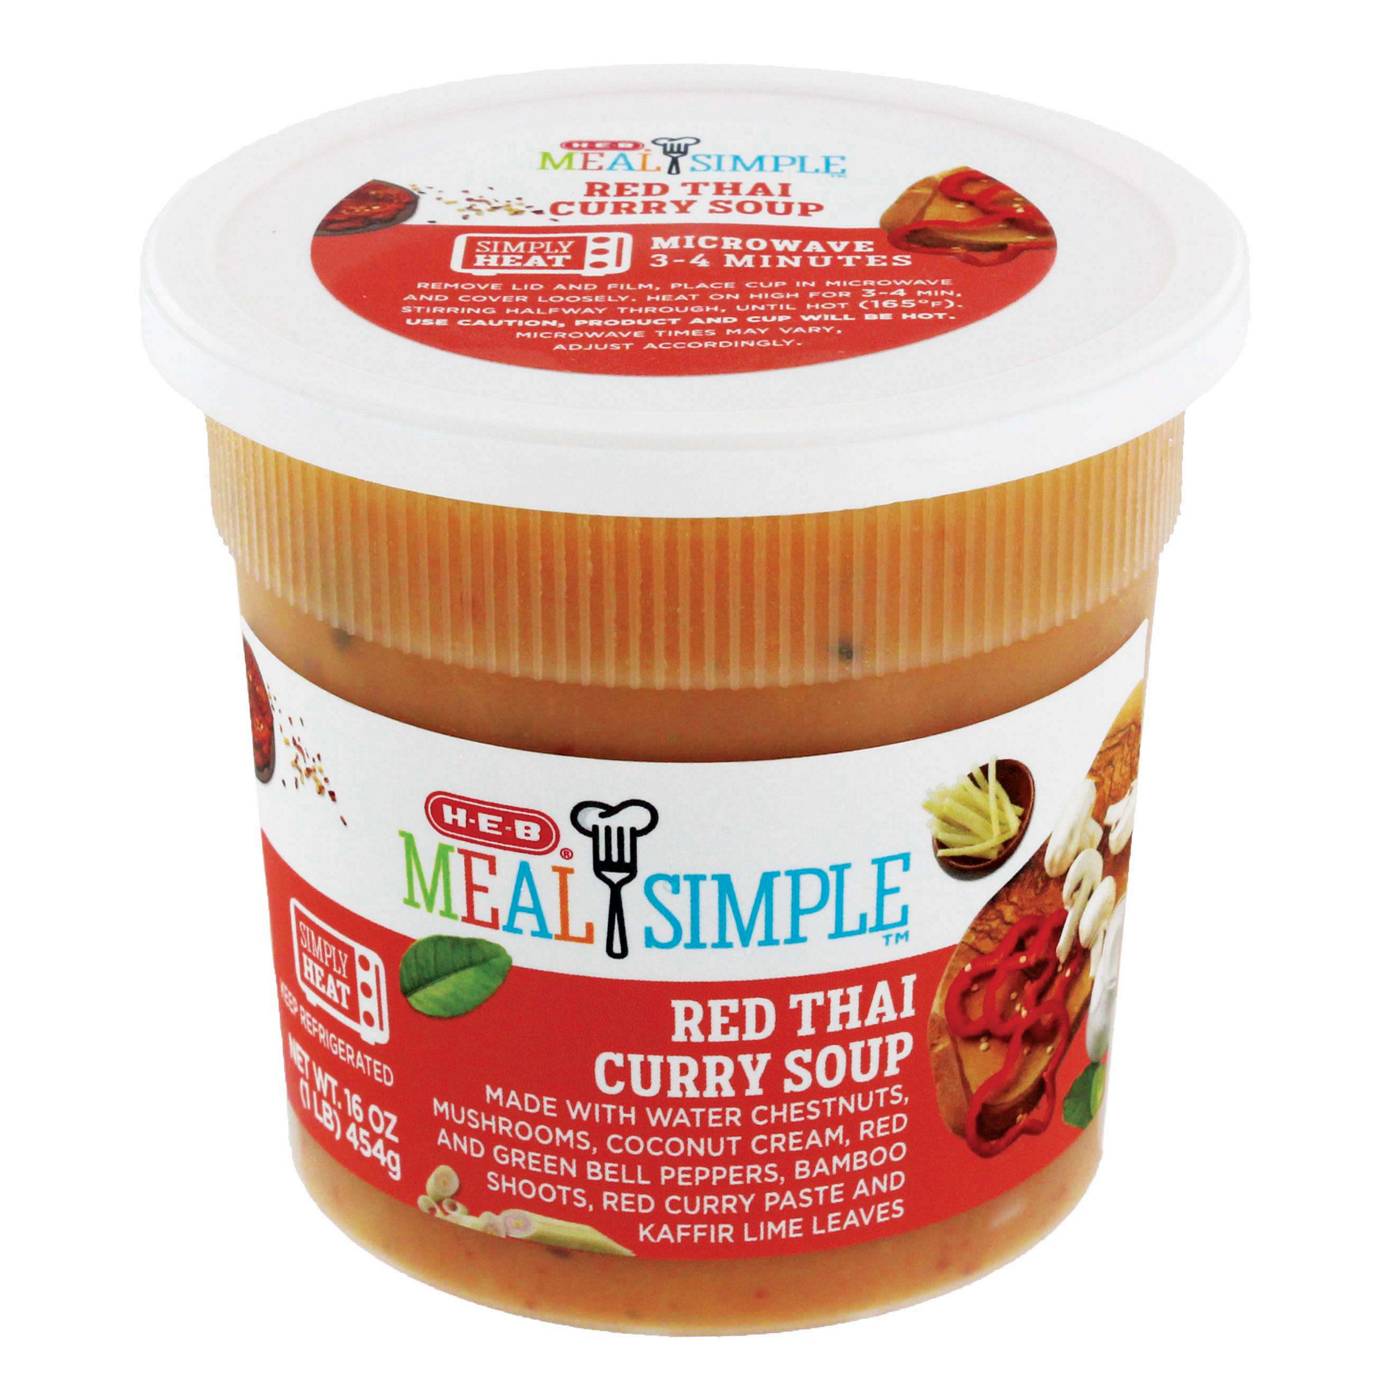 Meal Simple by H-E-B Red Thai Curry Soup; image 2 of 3